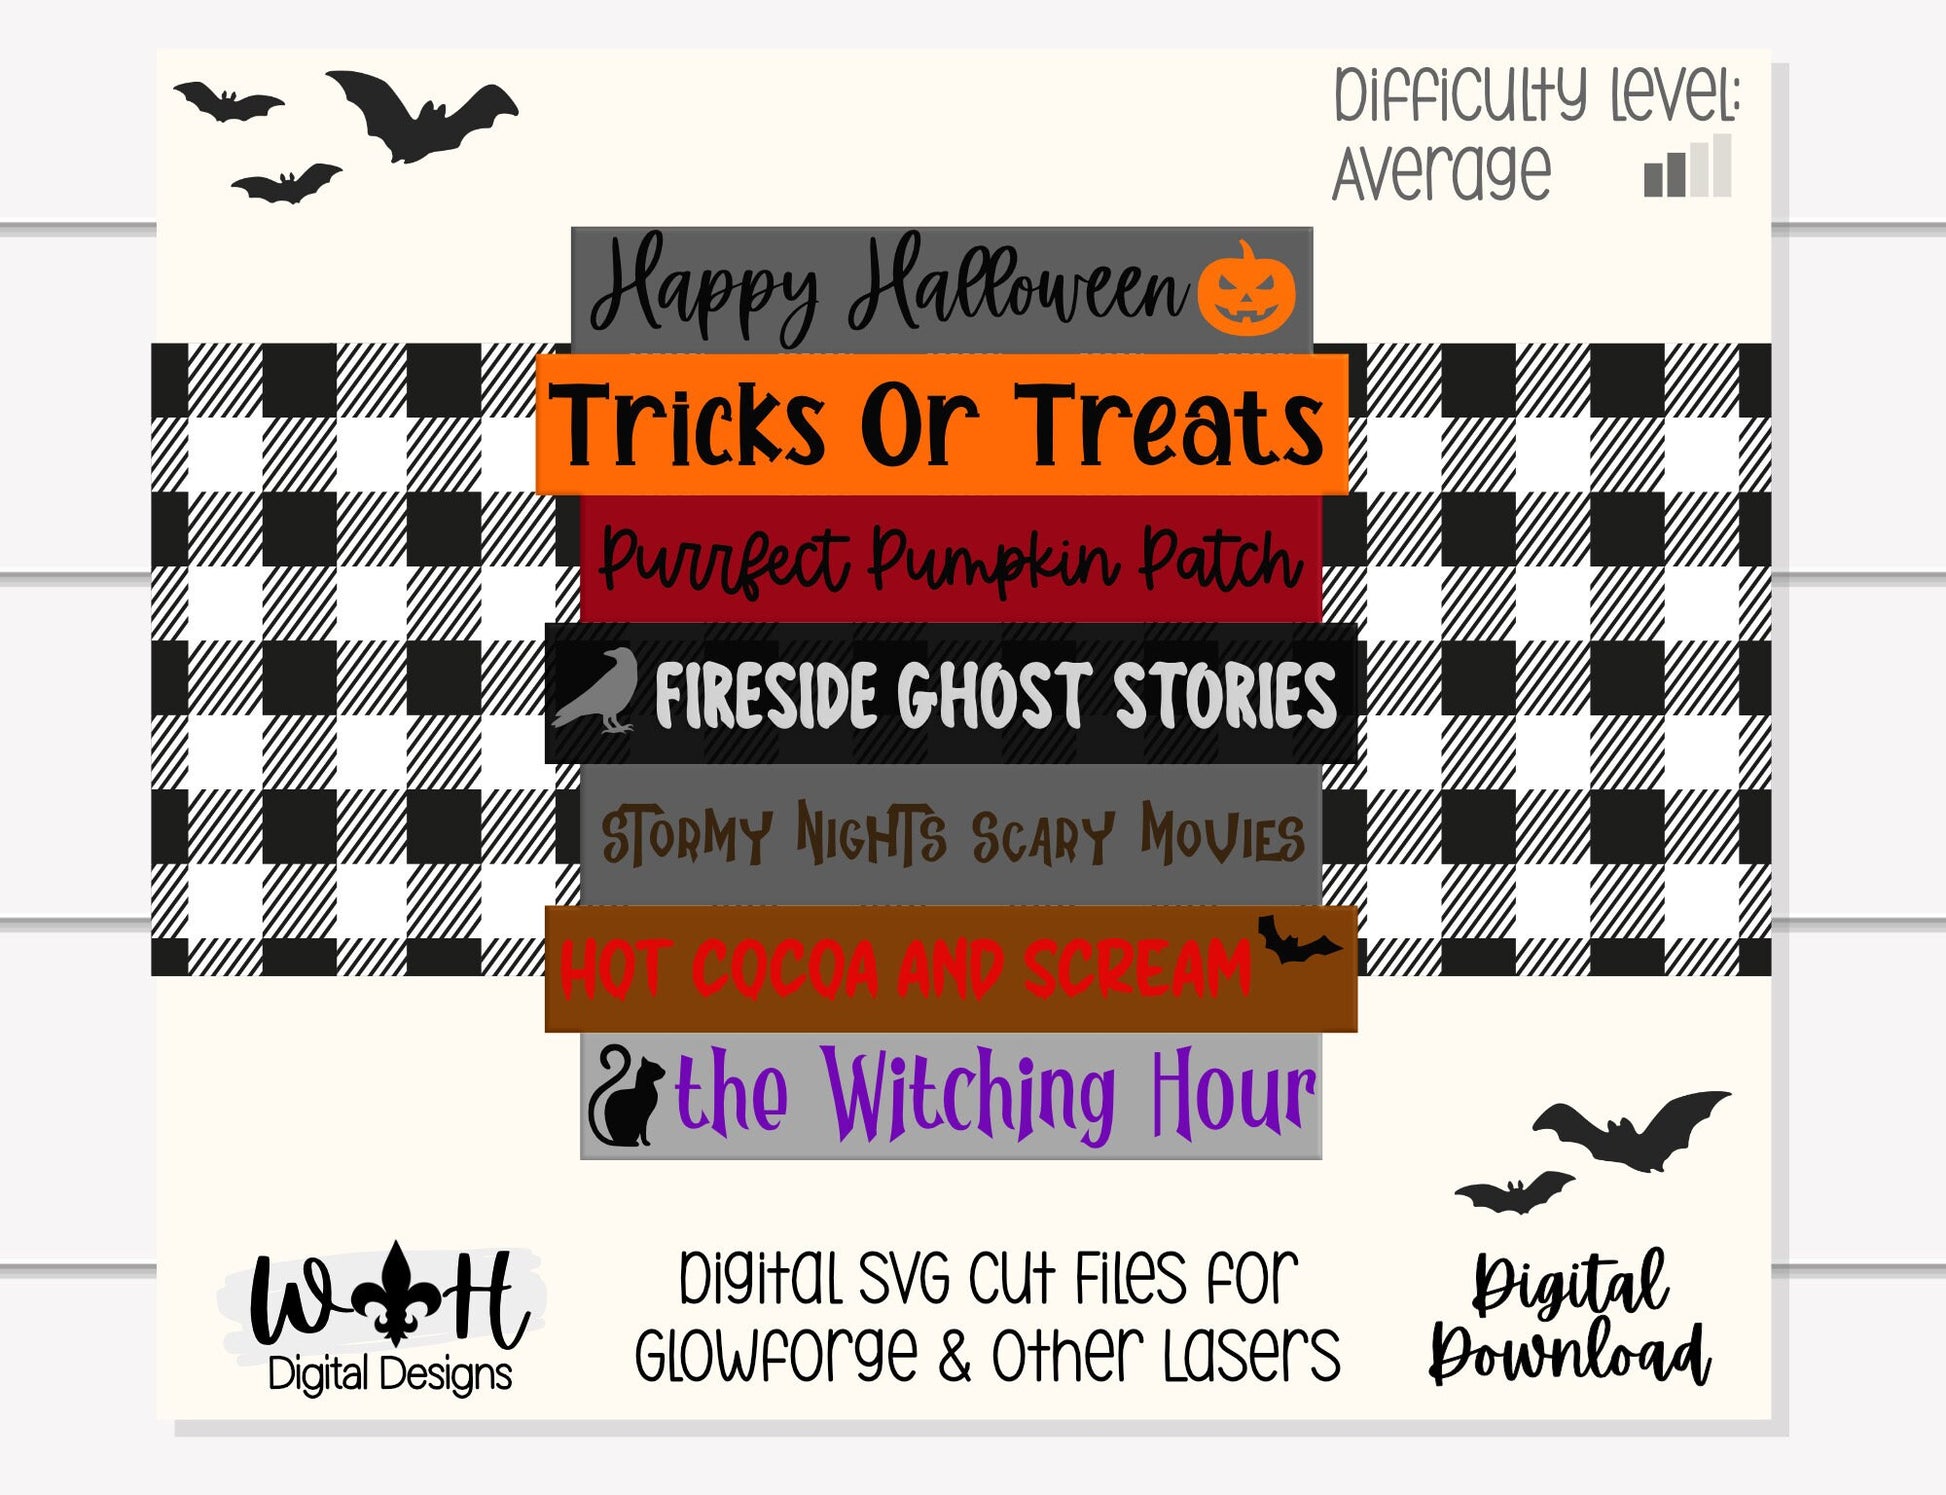 Happy Halloween Trick or Treat Bucket List Stacked Sign - Seasonal Wall Decor and DIY Kits - Cut File For Glowforge Laser - Digital SVG File